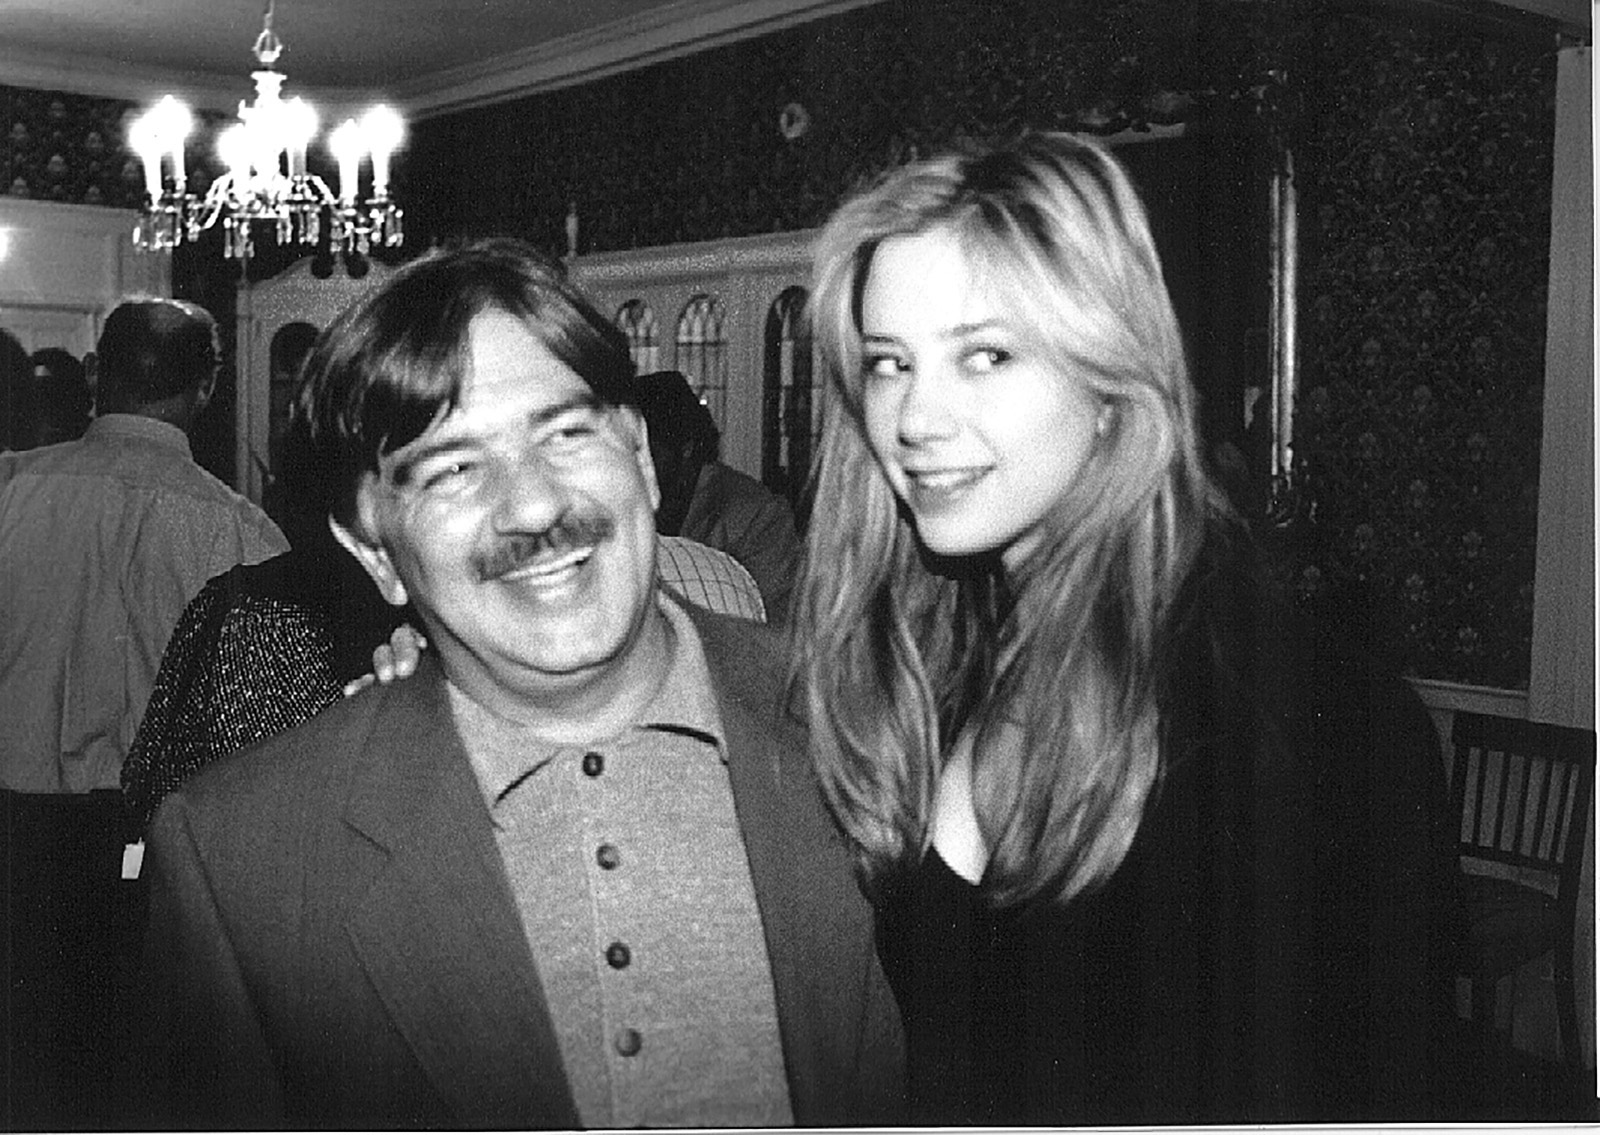 Festival founder, Darryl Macdonald, poses with actress, Mira Sorvino, in town for her films Blue in the Face, Sweet Nothing, and Tarantella